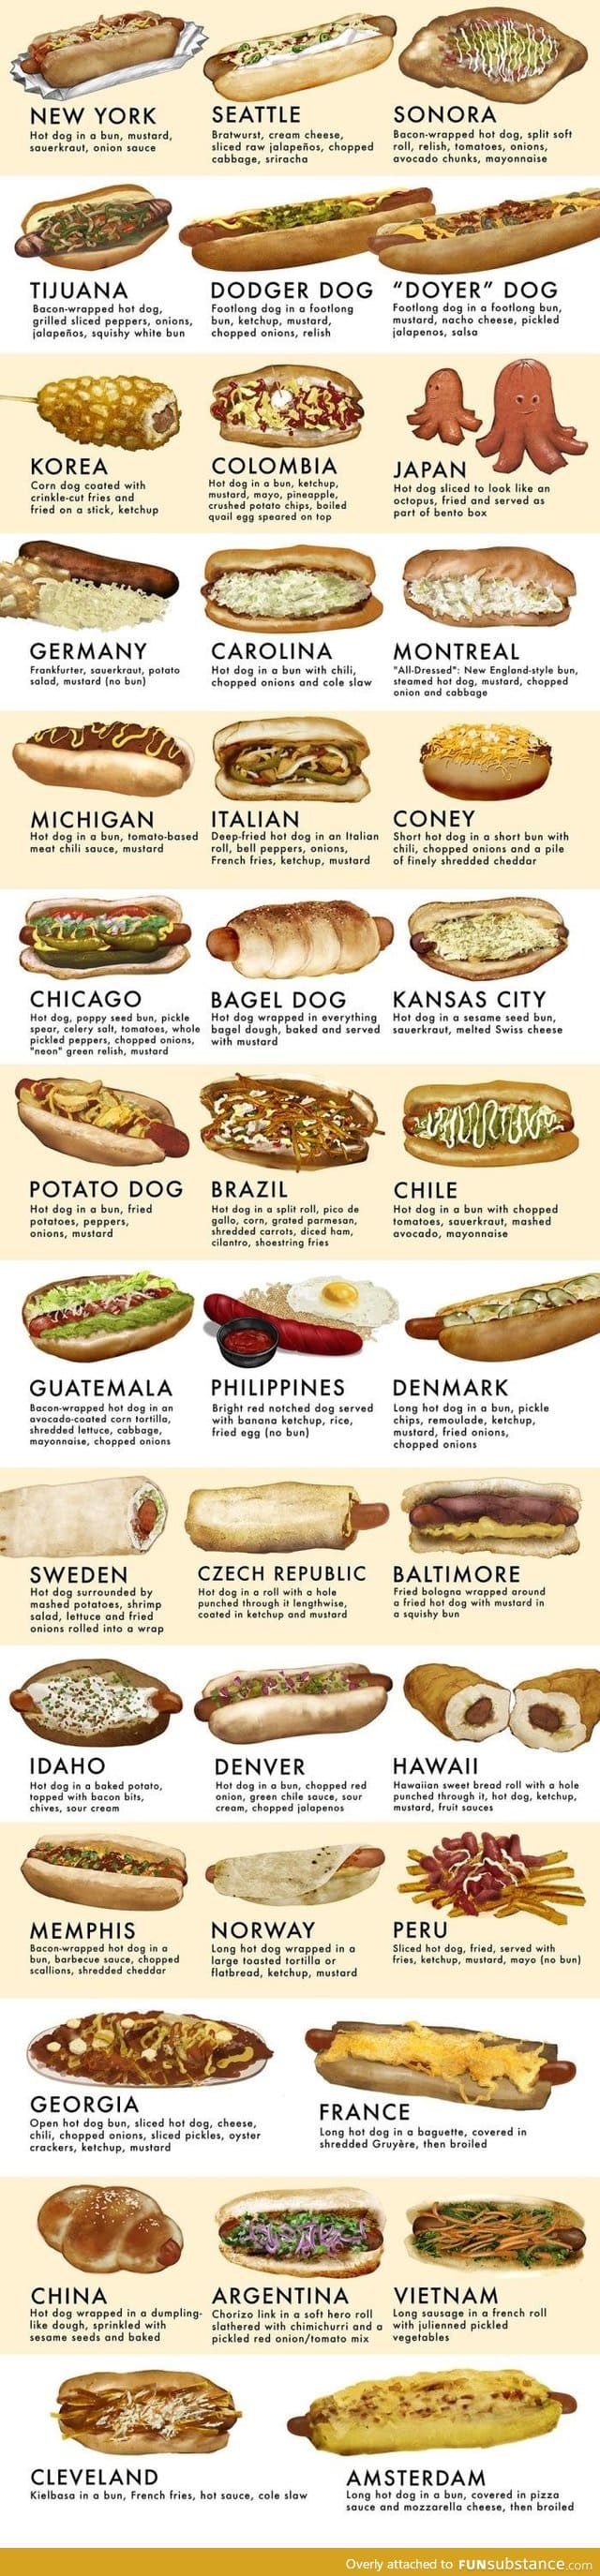 40 ways the world makes awesome hot dogs